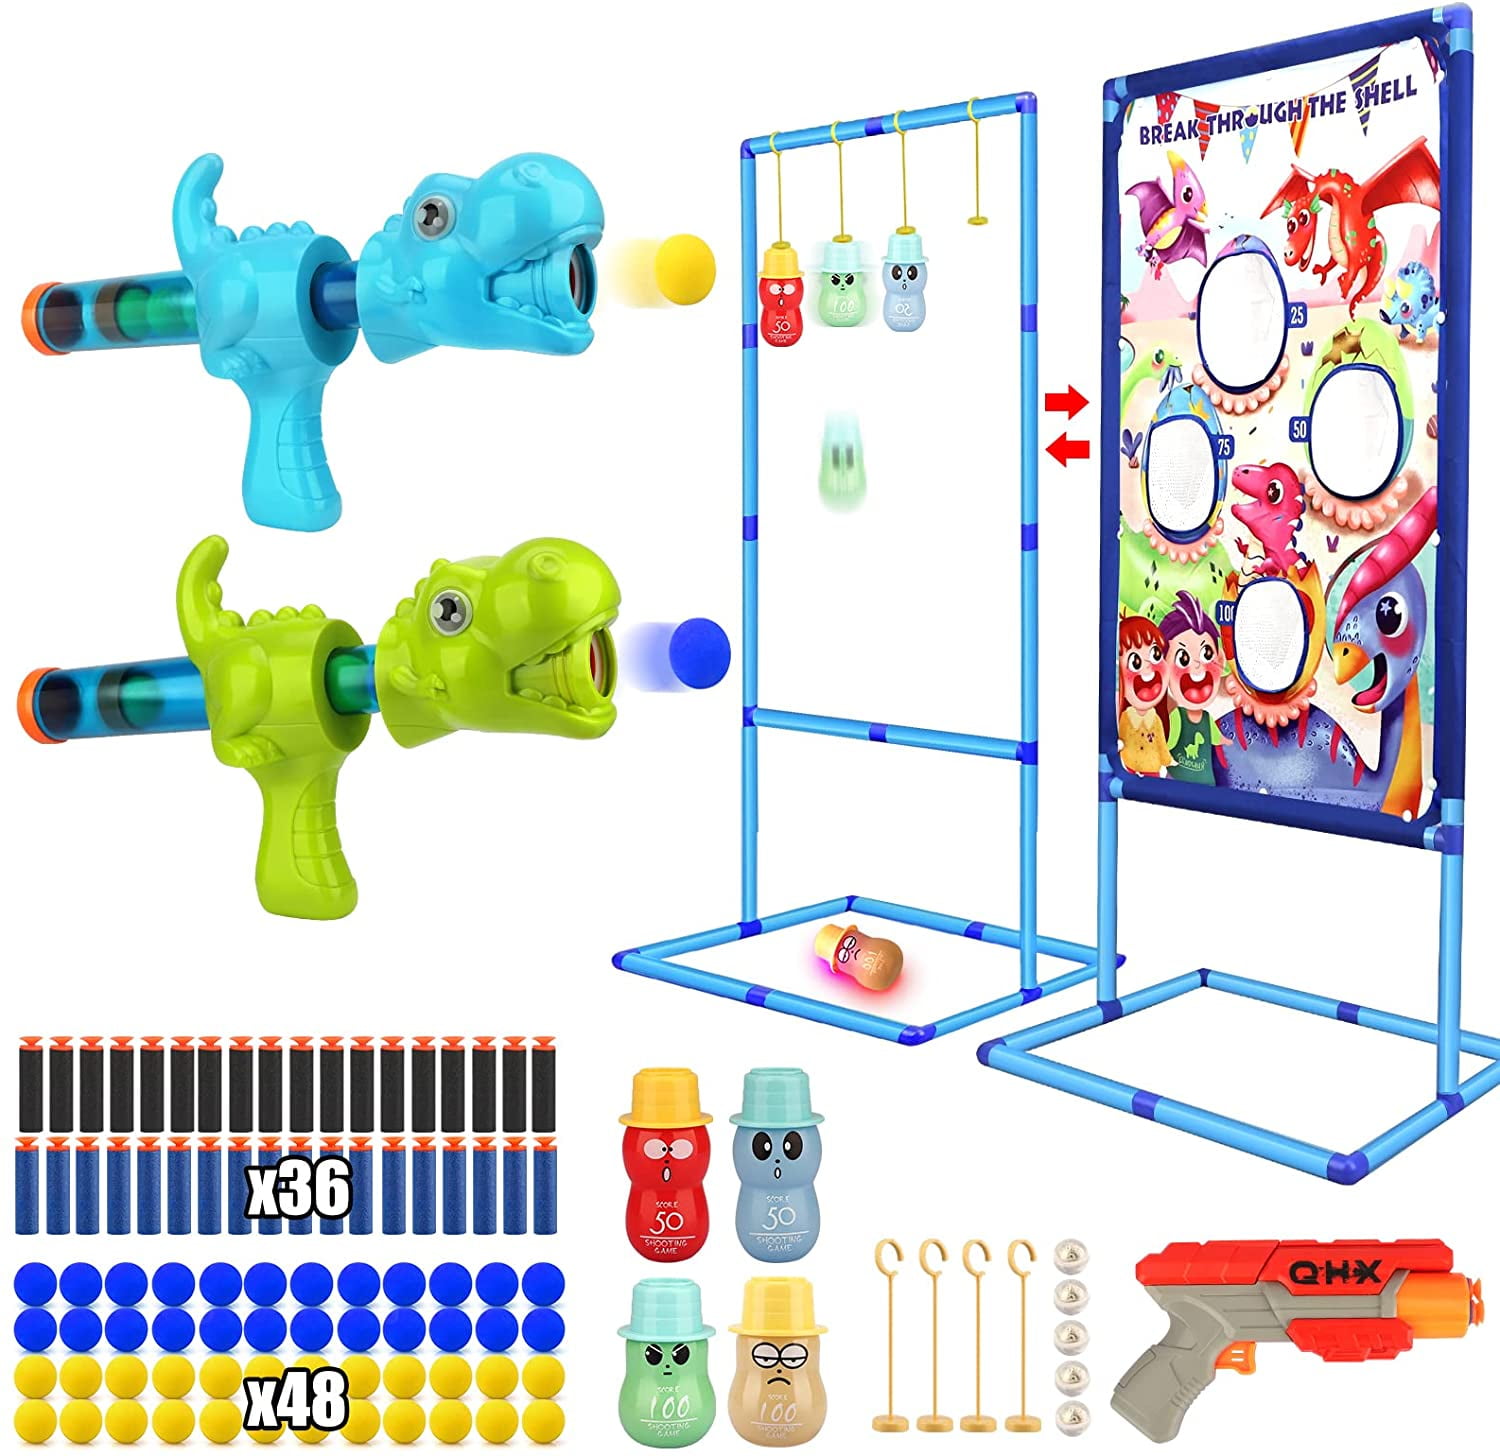 10+ Shooting Practice for Nerf Toys Kids 6 24 Foam Darts & 8 Balls EagleStone Shooting Targets for Shooting Games 8 9 2021 Newest Double Barrel Target for Nerf with 2 Shooting Blaster Guns 7 